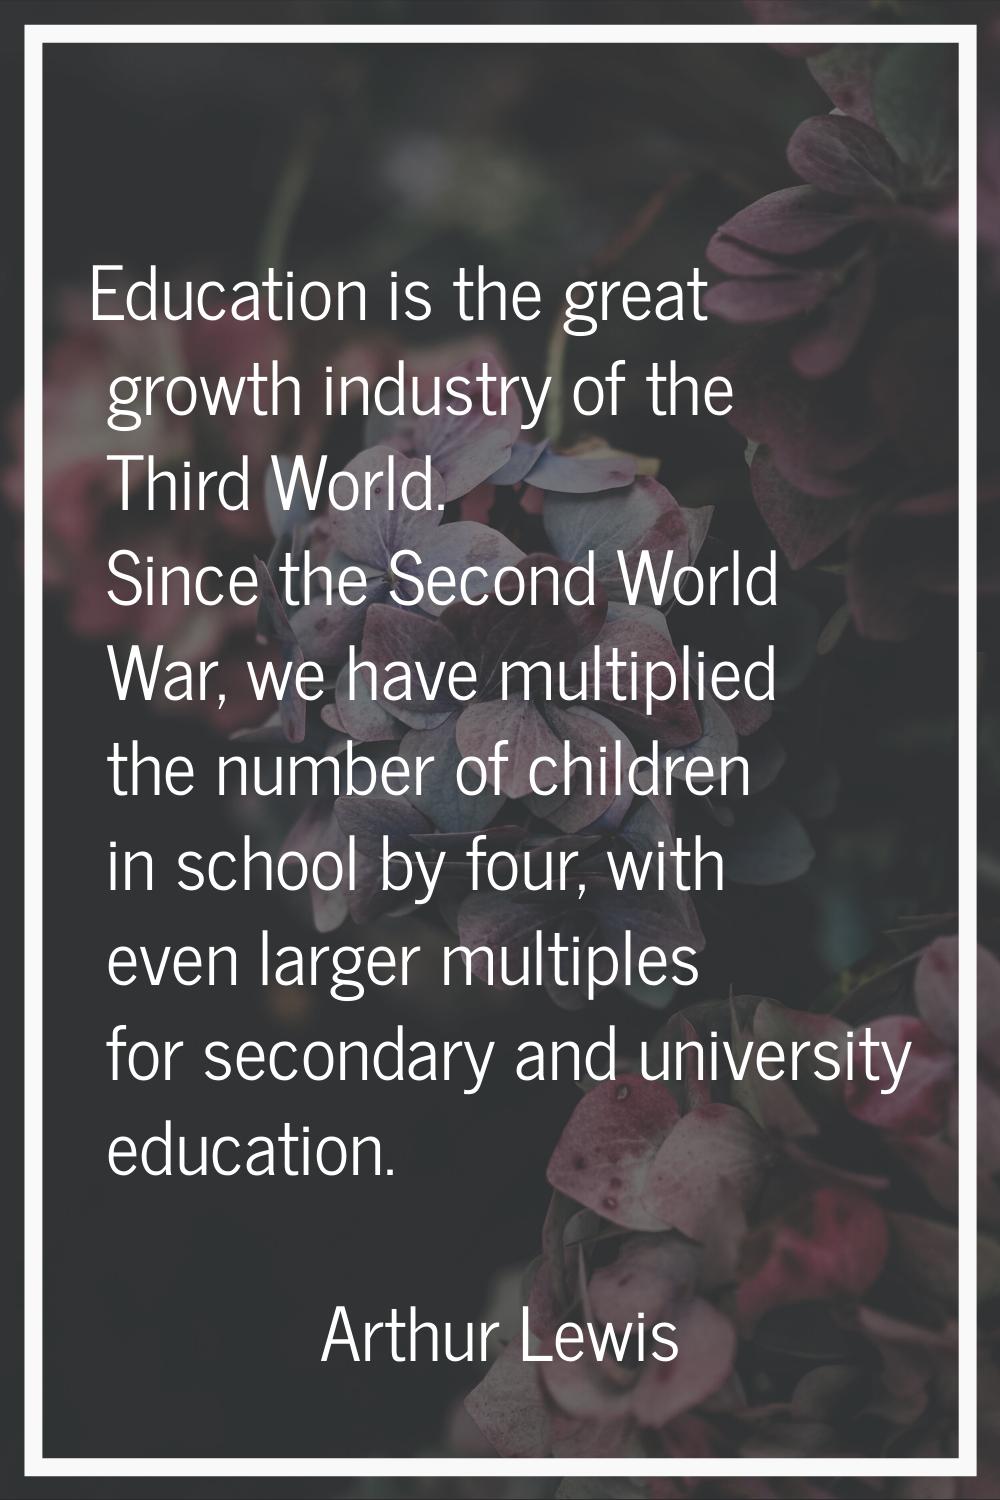 Education is the great growth industry of the Third World. Since the Second World War, we have mult